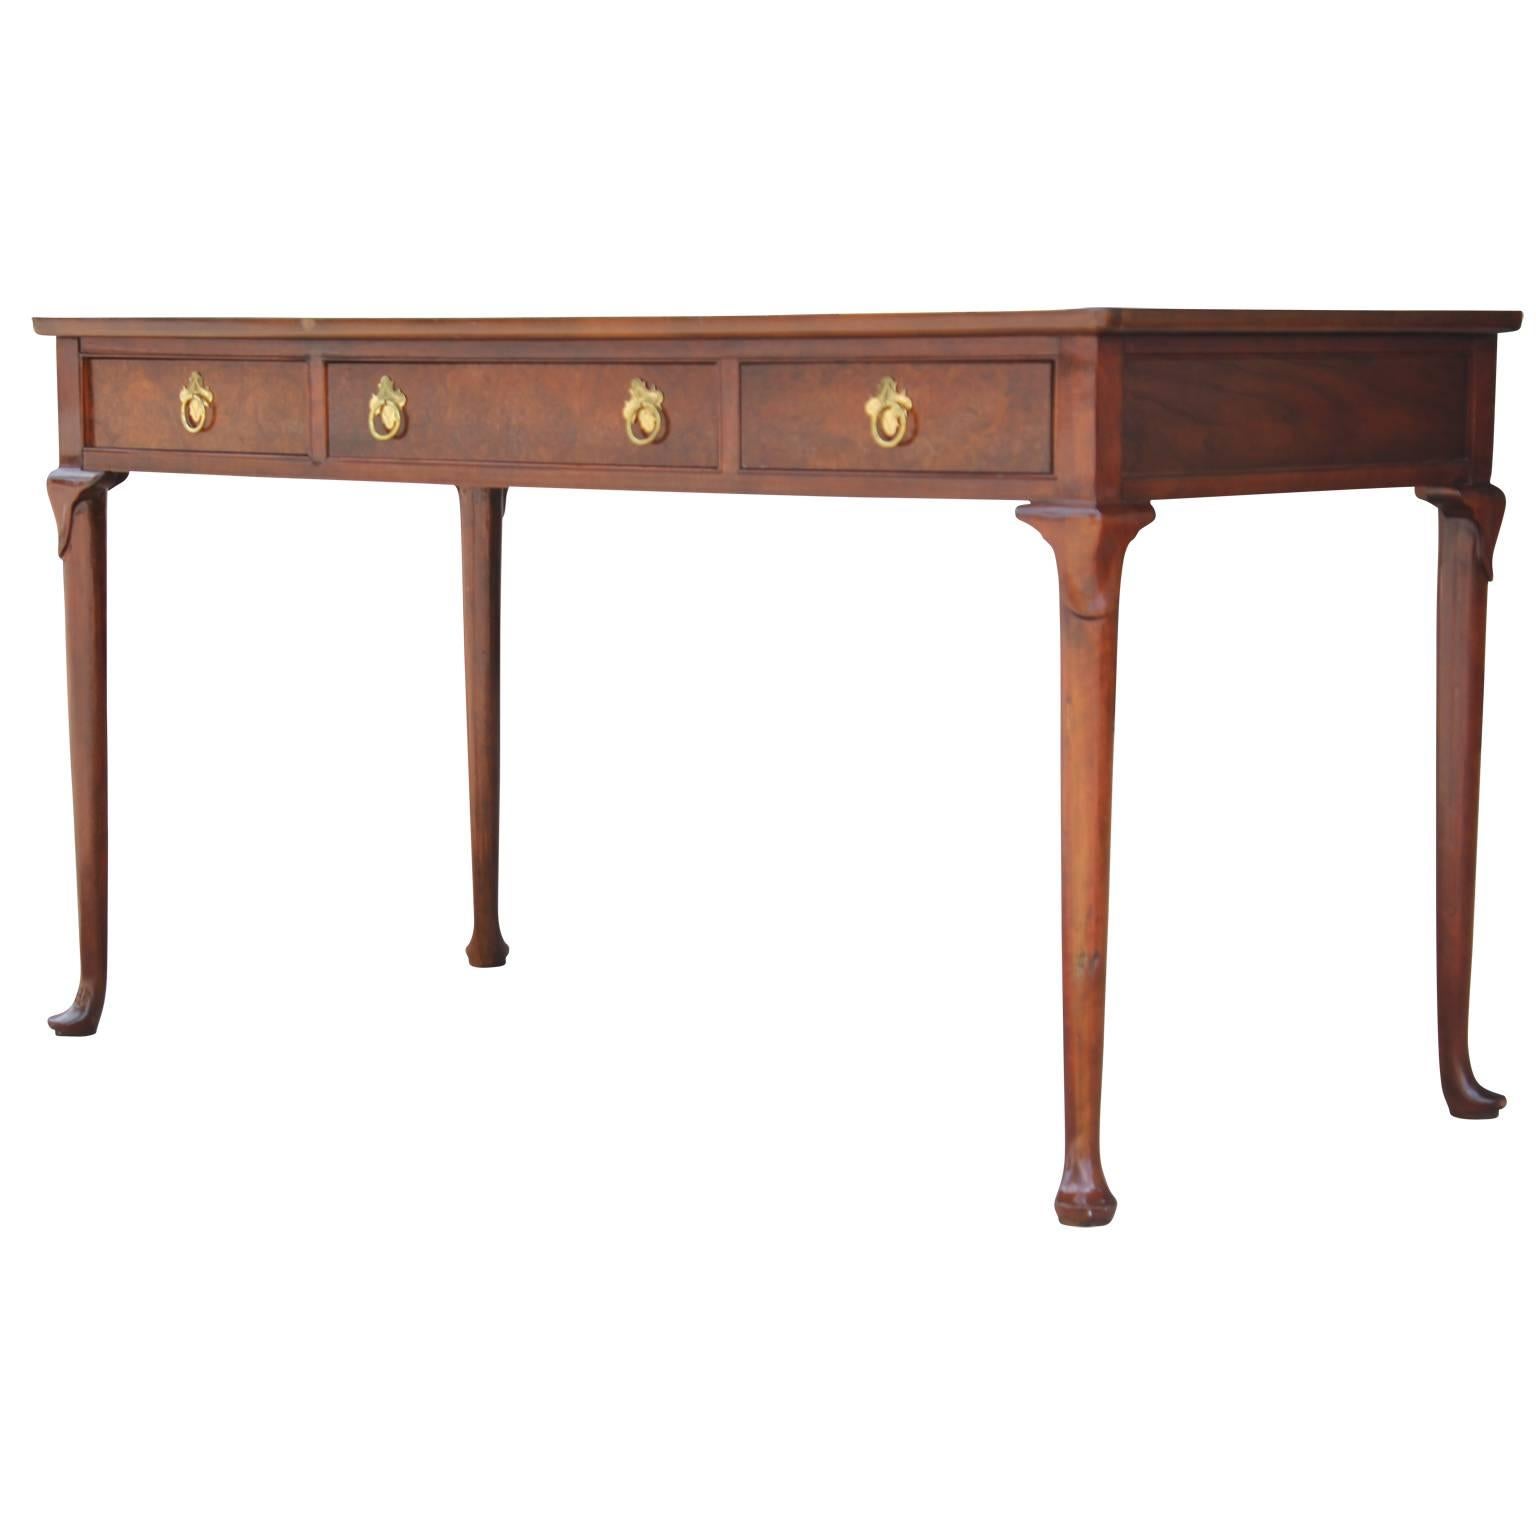 Lovely burl and walnut Queen Anne writing table or desk made by Baker Furniture. This piece is in very nice, vintage condition and can be used as either a writing table, or a desk. This desk is has three drawers, accompanied with four marvelous